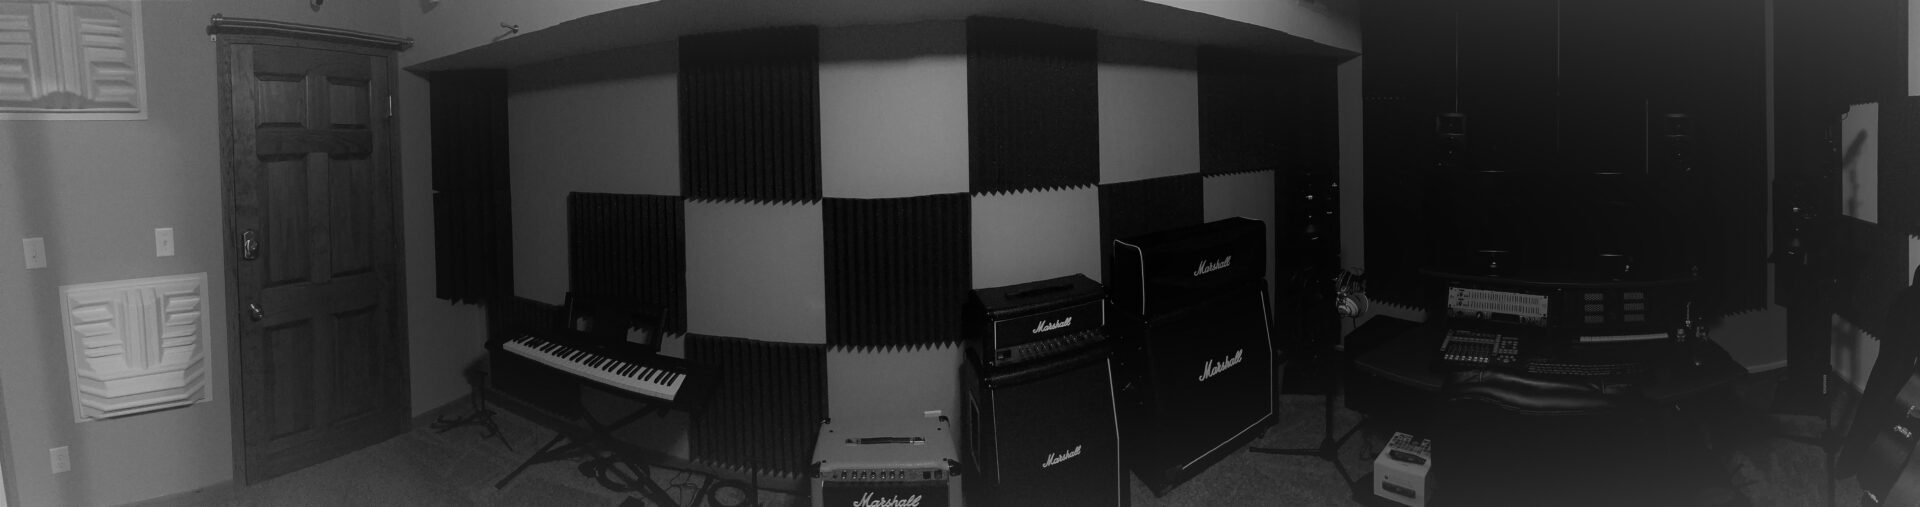 music production room with a keyboard and amps